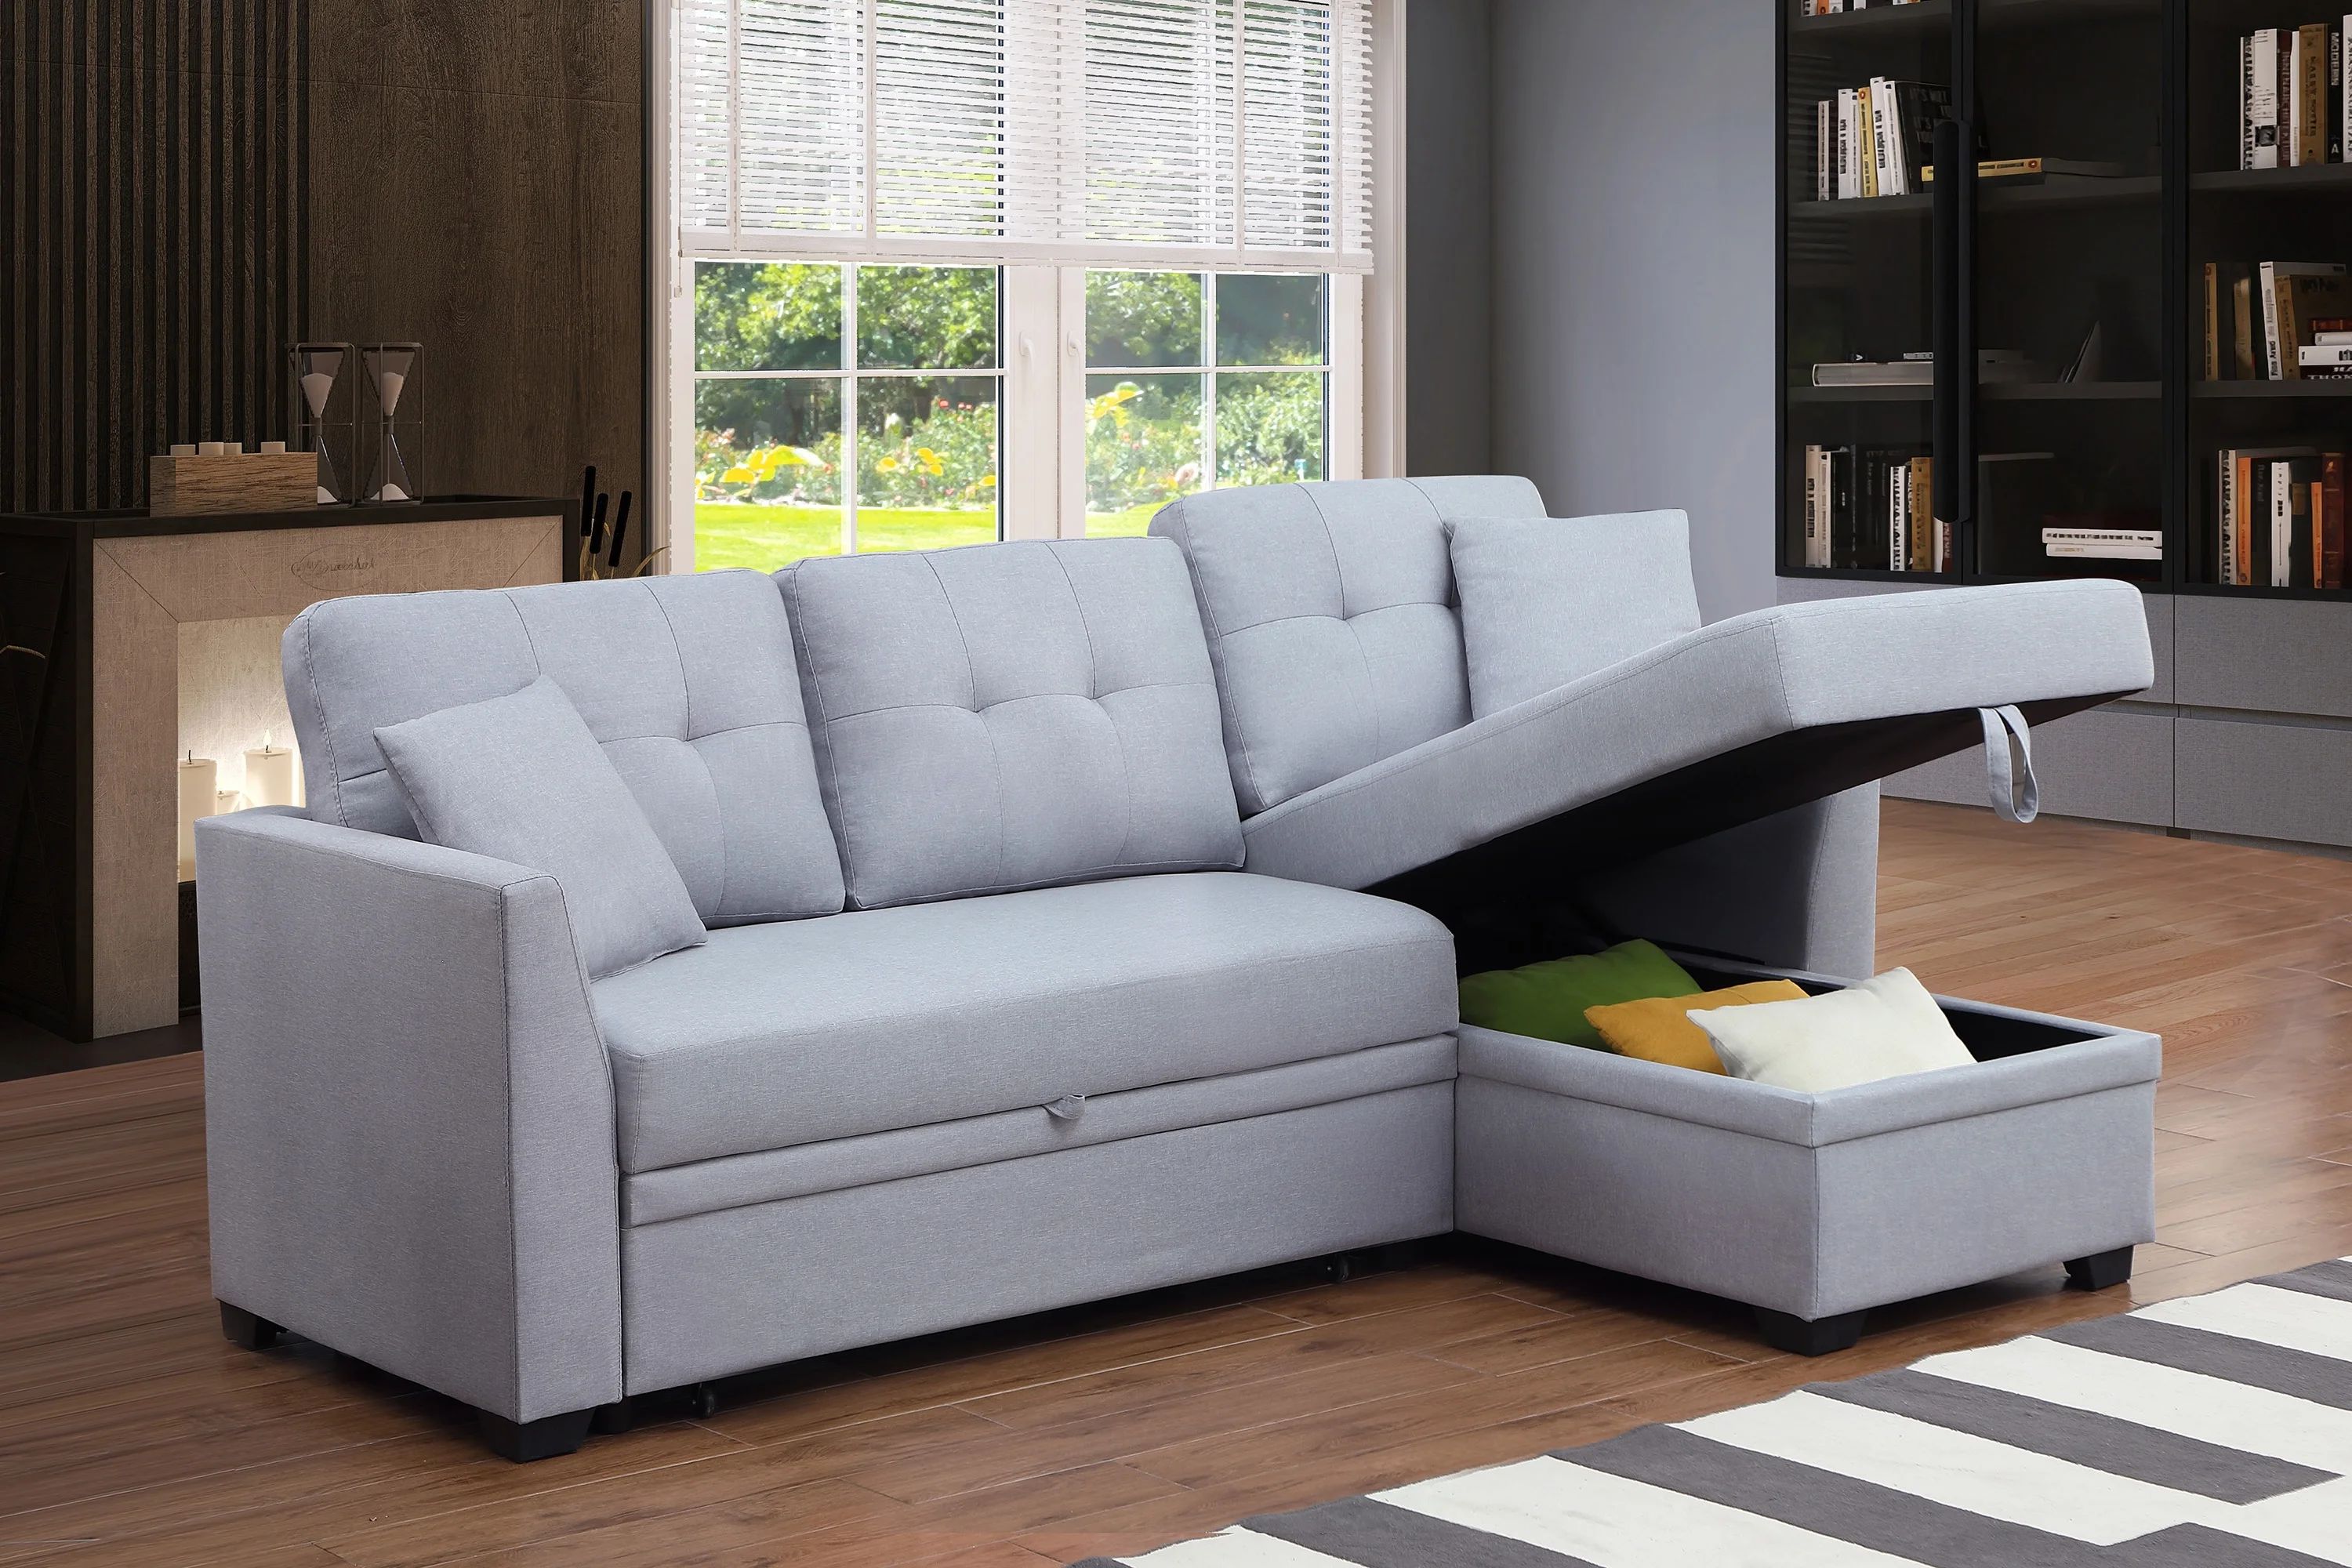 Alexent 3-Seat Modern Fabric Sleeper Sectional Sofa with Storage in Ash | Walmart (US)